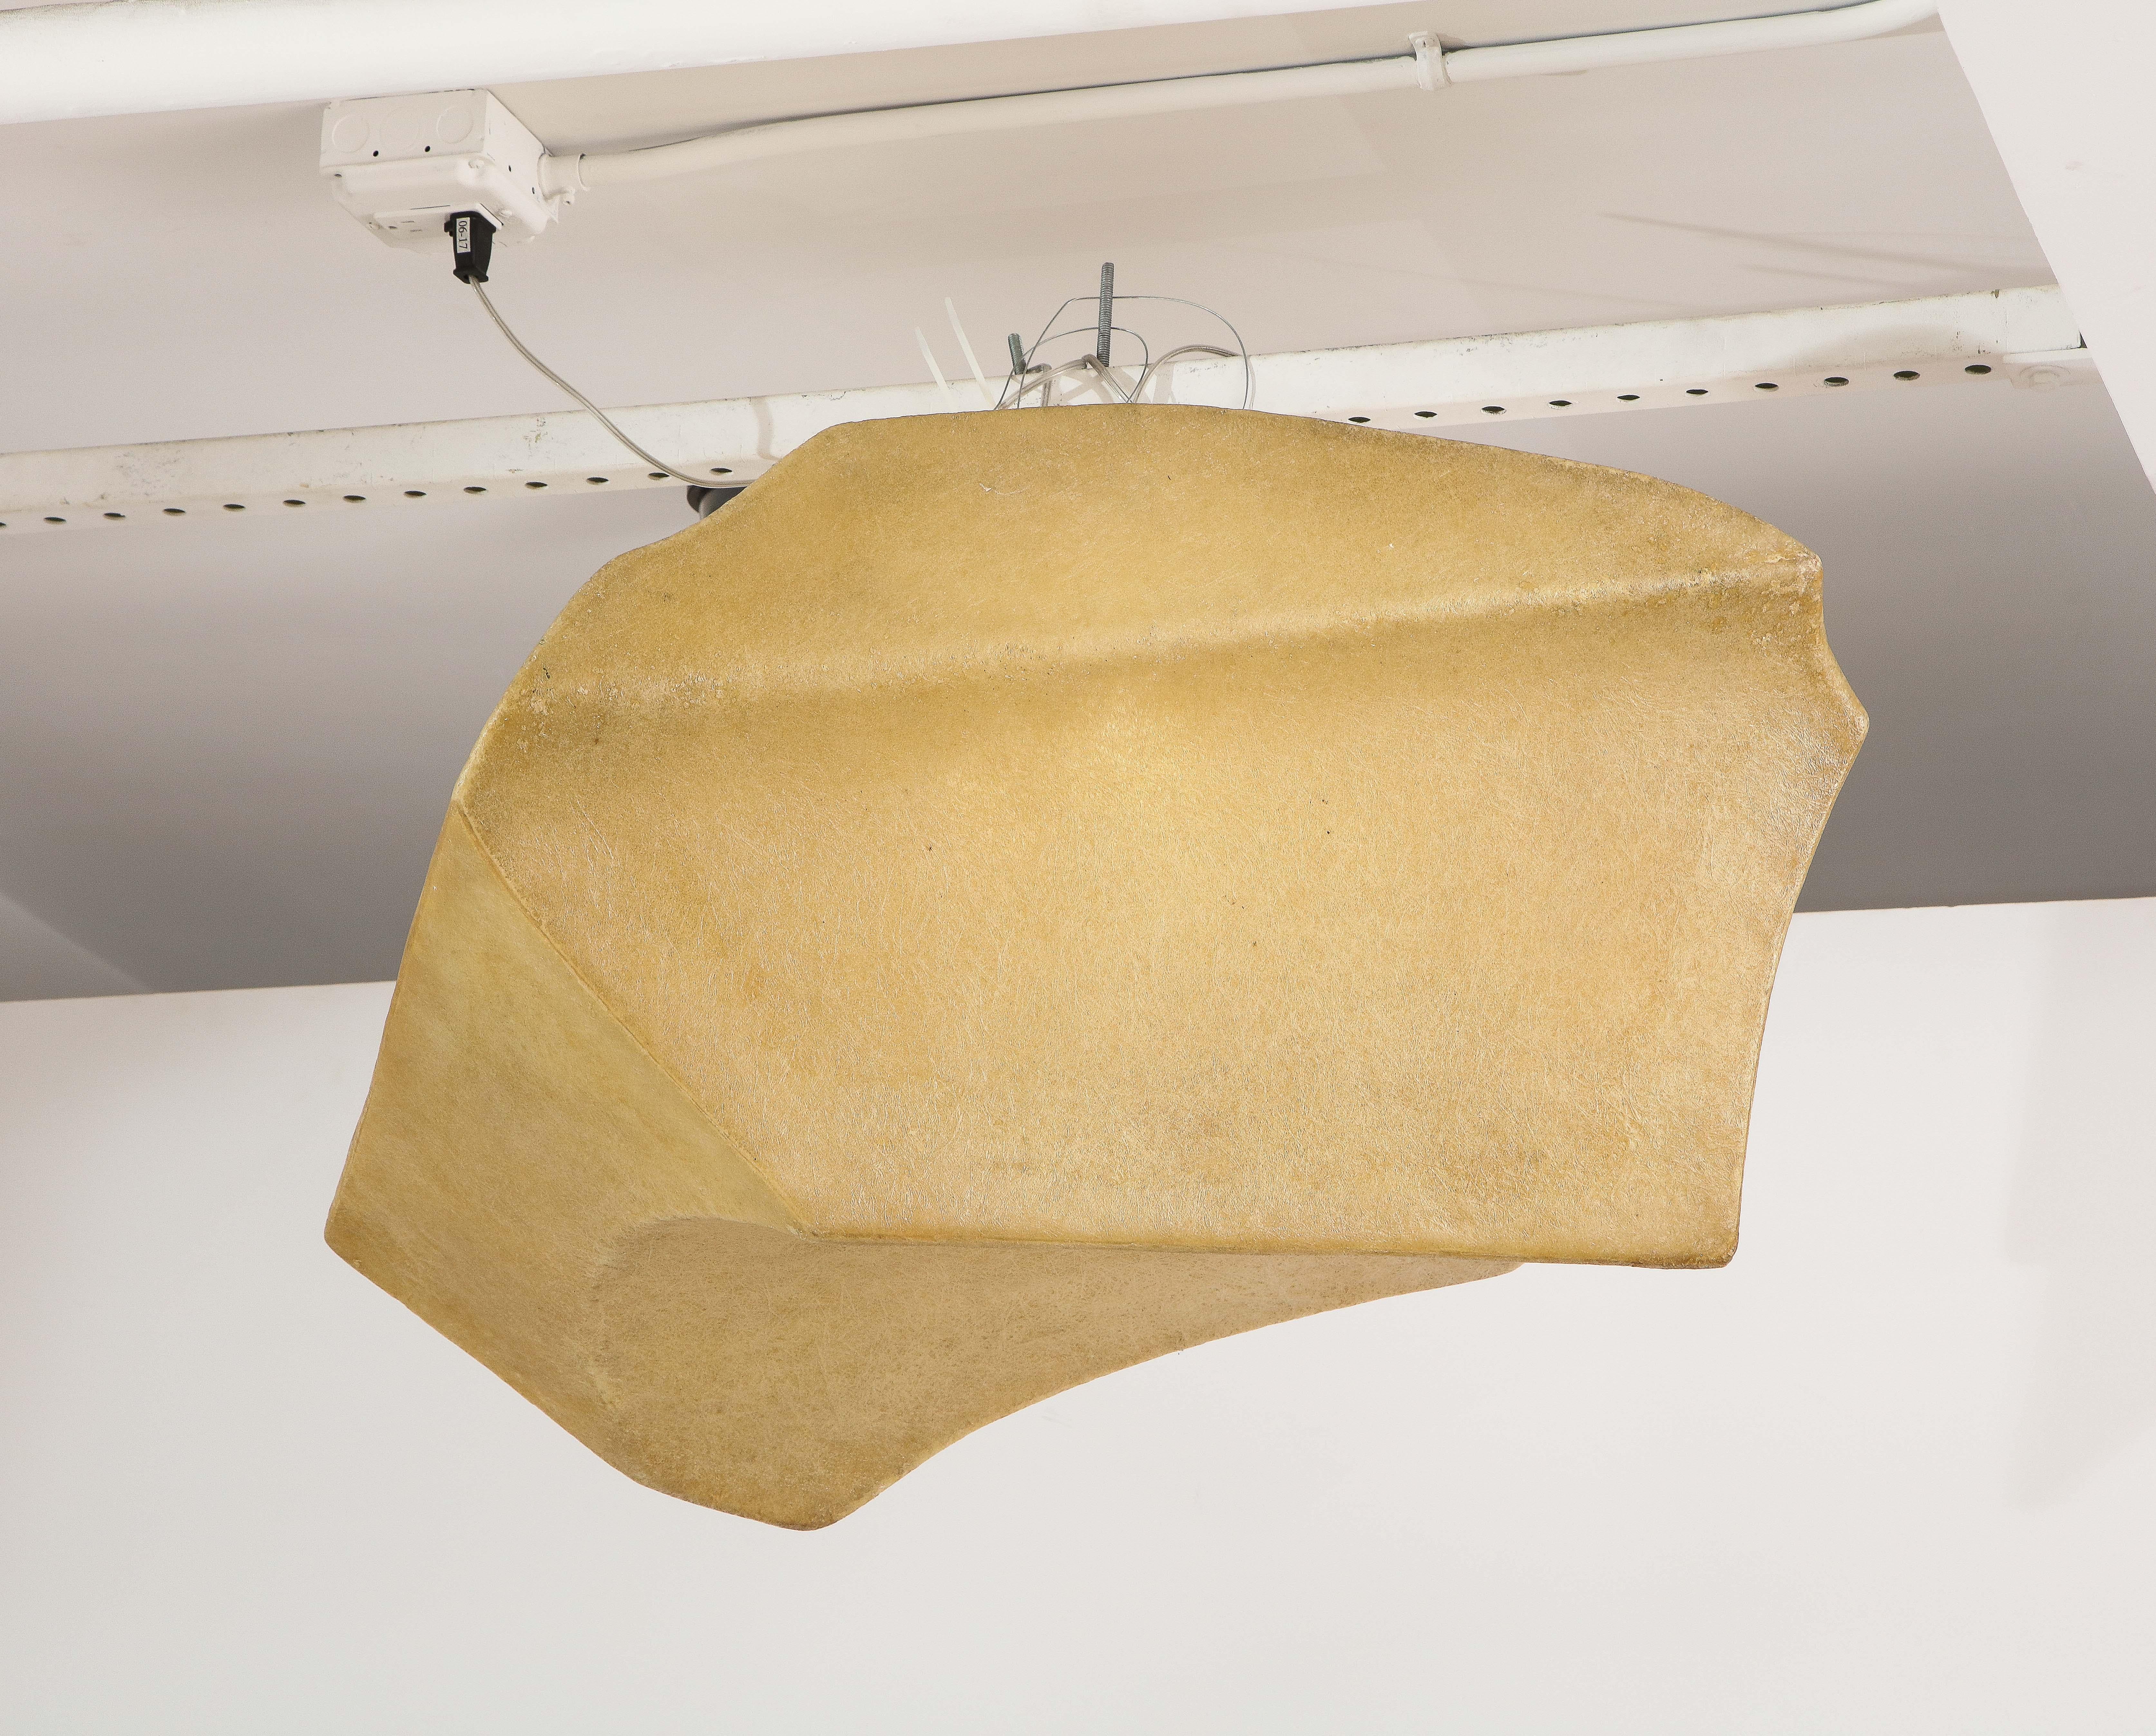 Andre Cazenave, Special Commission Suspension Floating Form for Psychoanalyst’s Office, Unique Piece, Paris, France, c. 1968
Transluscent Fiberglass
Measures: H: 18 D: 27.5 W: 28.75

Is suspended from Thin Cable, Should be floating on the cable